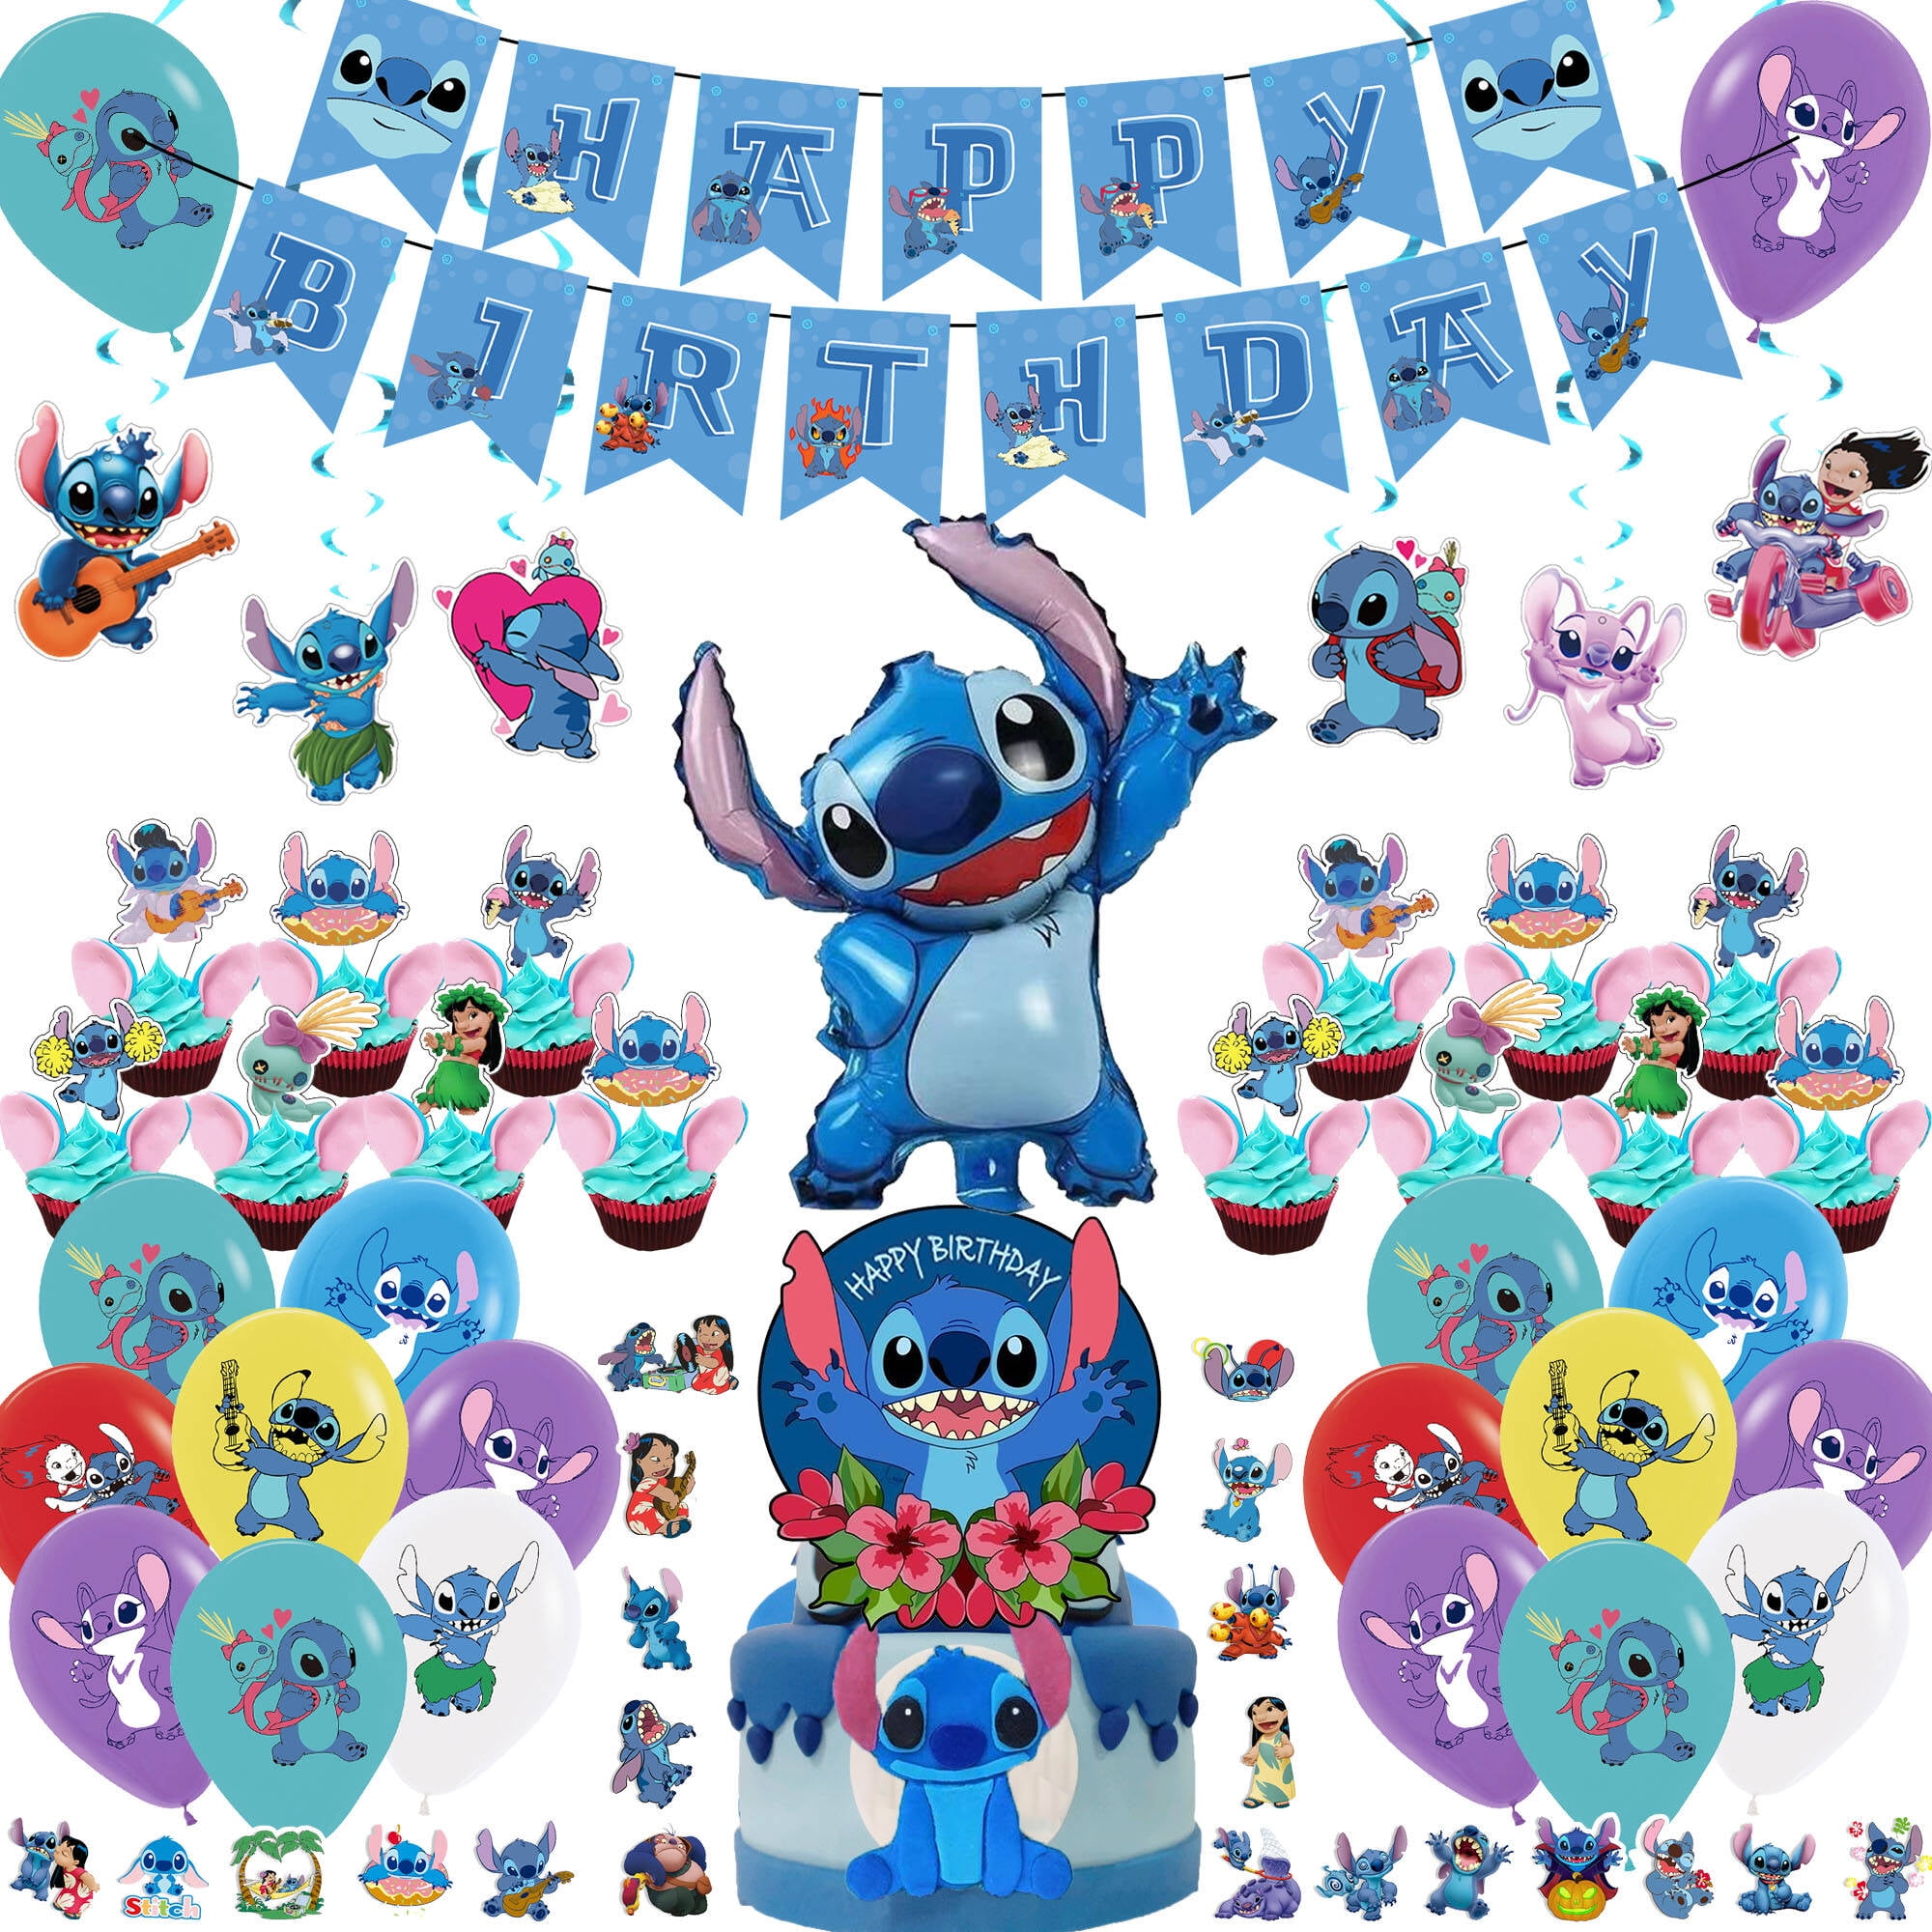 tmroo 102PCS Stitch Party Supplies, Include Banner, Cake Topper, Balloons,  Hanging Swirls for Stitch Party Decorations